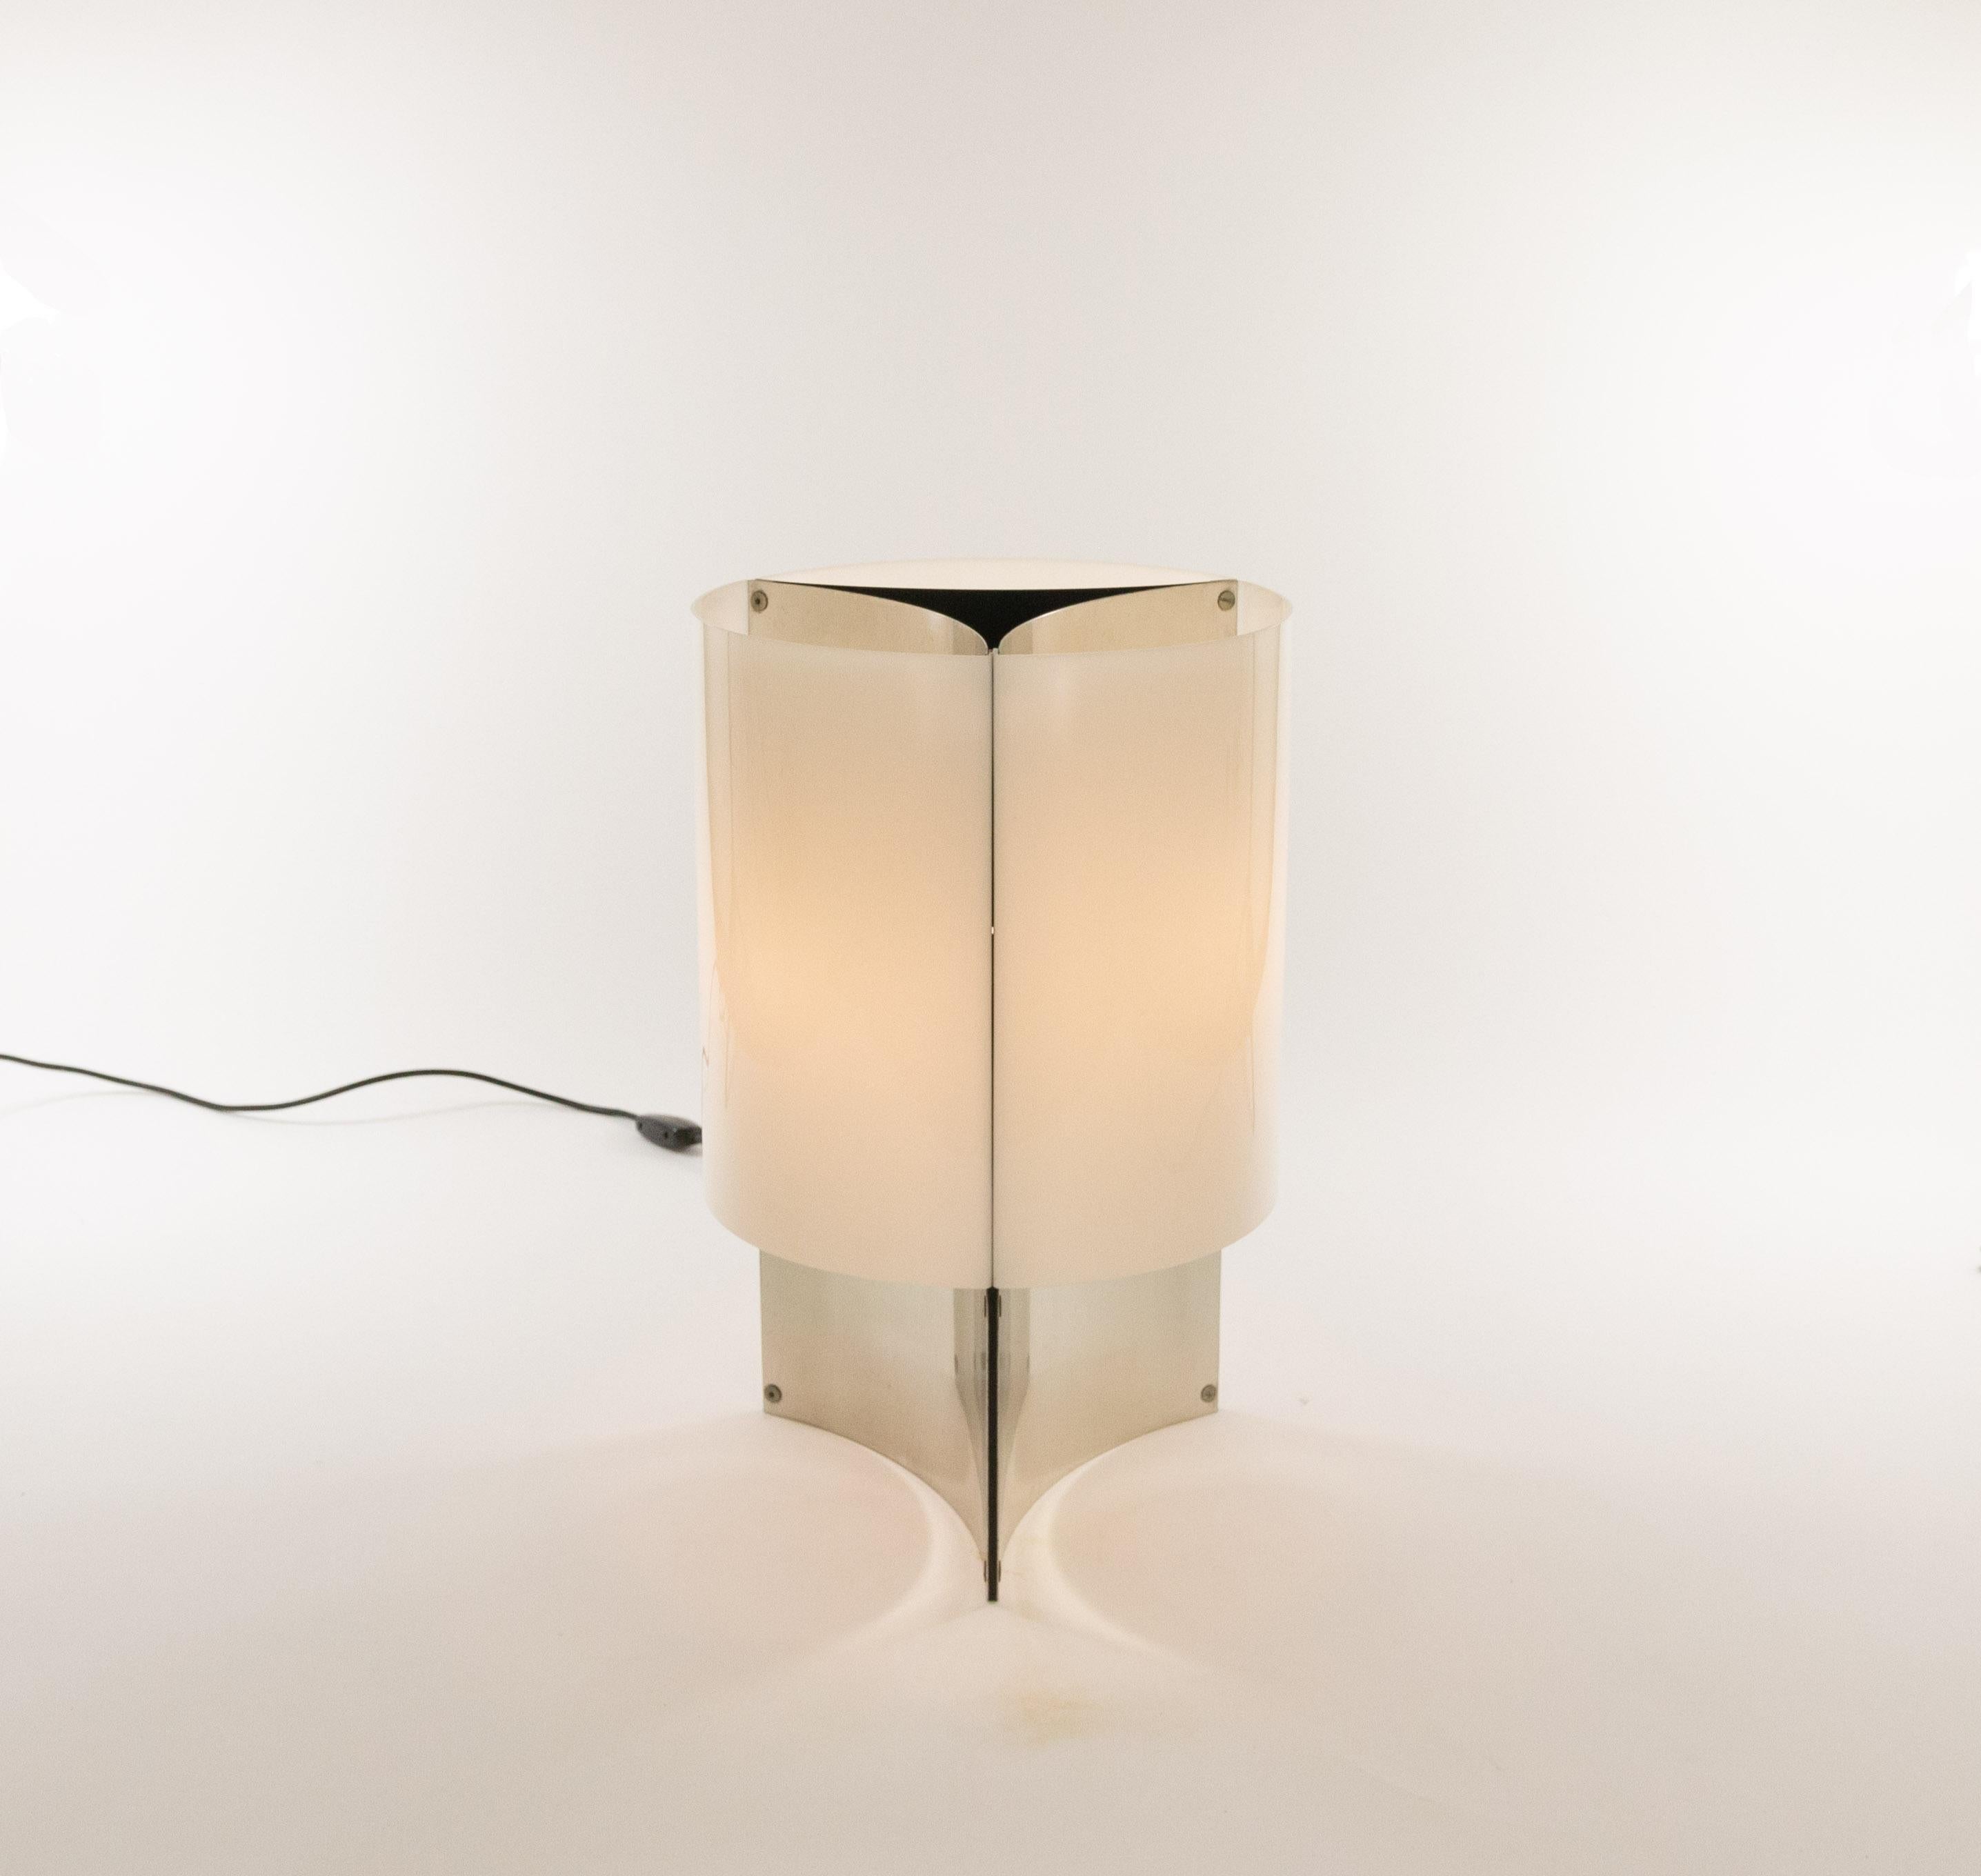 This elegant lamp model No. 526/P was designed in 1965 by Massimo Vignelli for Italian lighting manufacturer Arteluce.

Model No. 526 is a table lamp with a base that consists of three concave chromed sheets. This base is covered by white Perspex